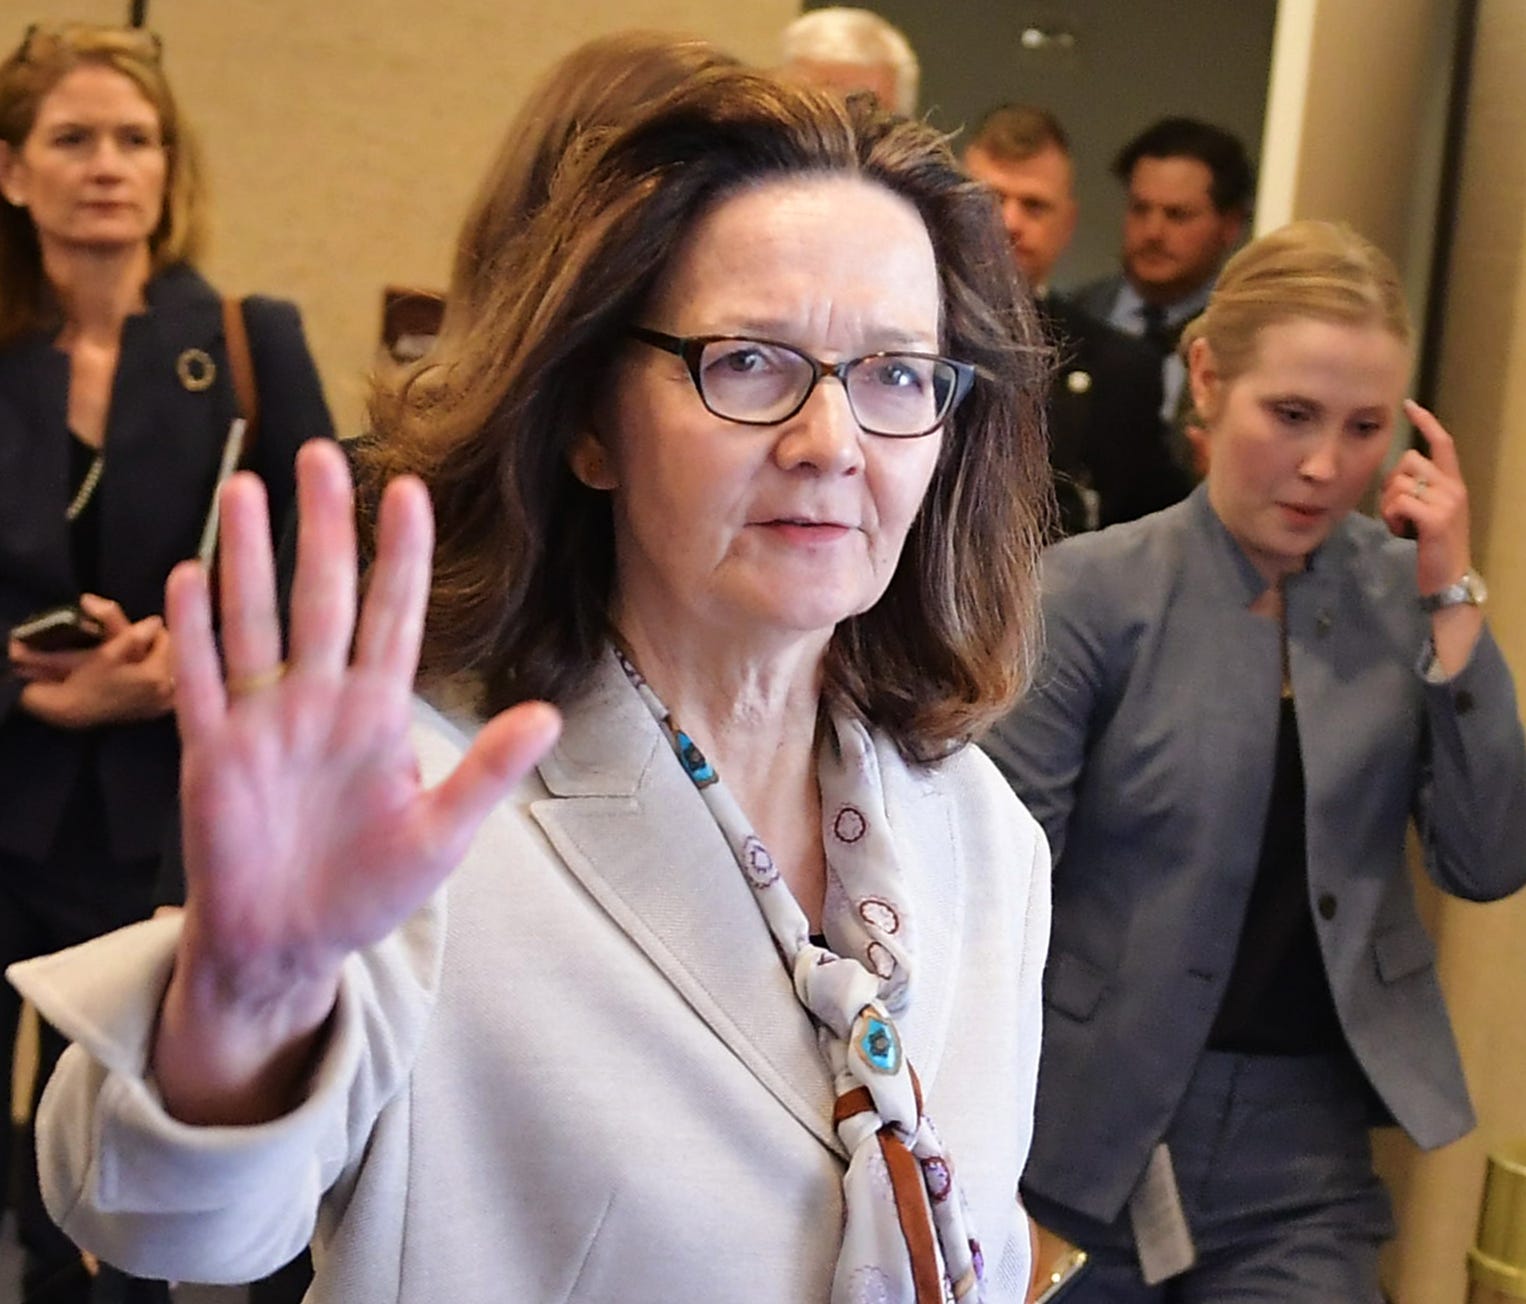 Gina Haspel appears after testifying before the Senate Intelligence Committee on her nomination to be the next CIA director.